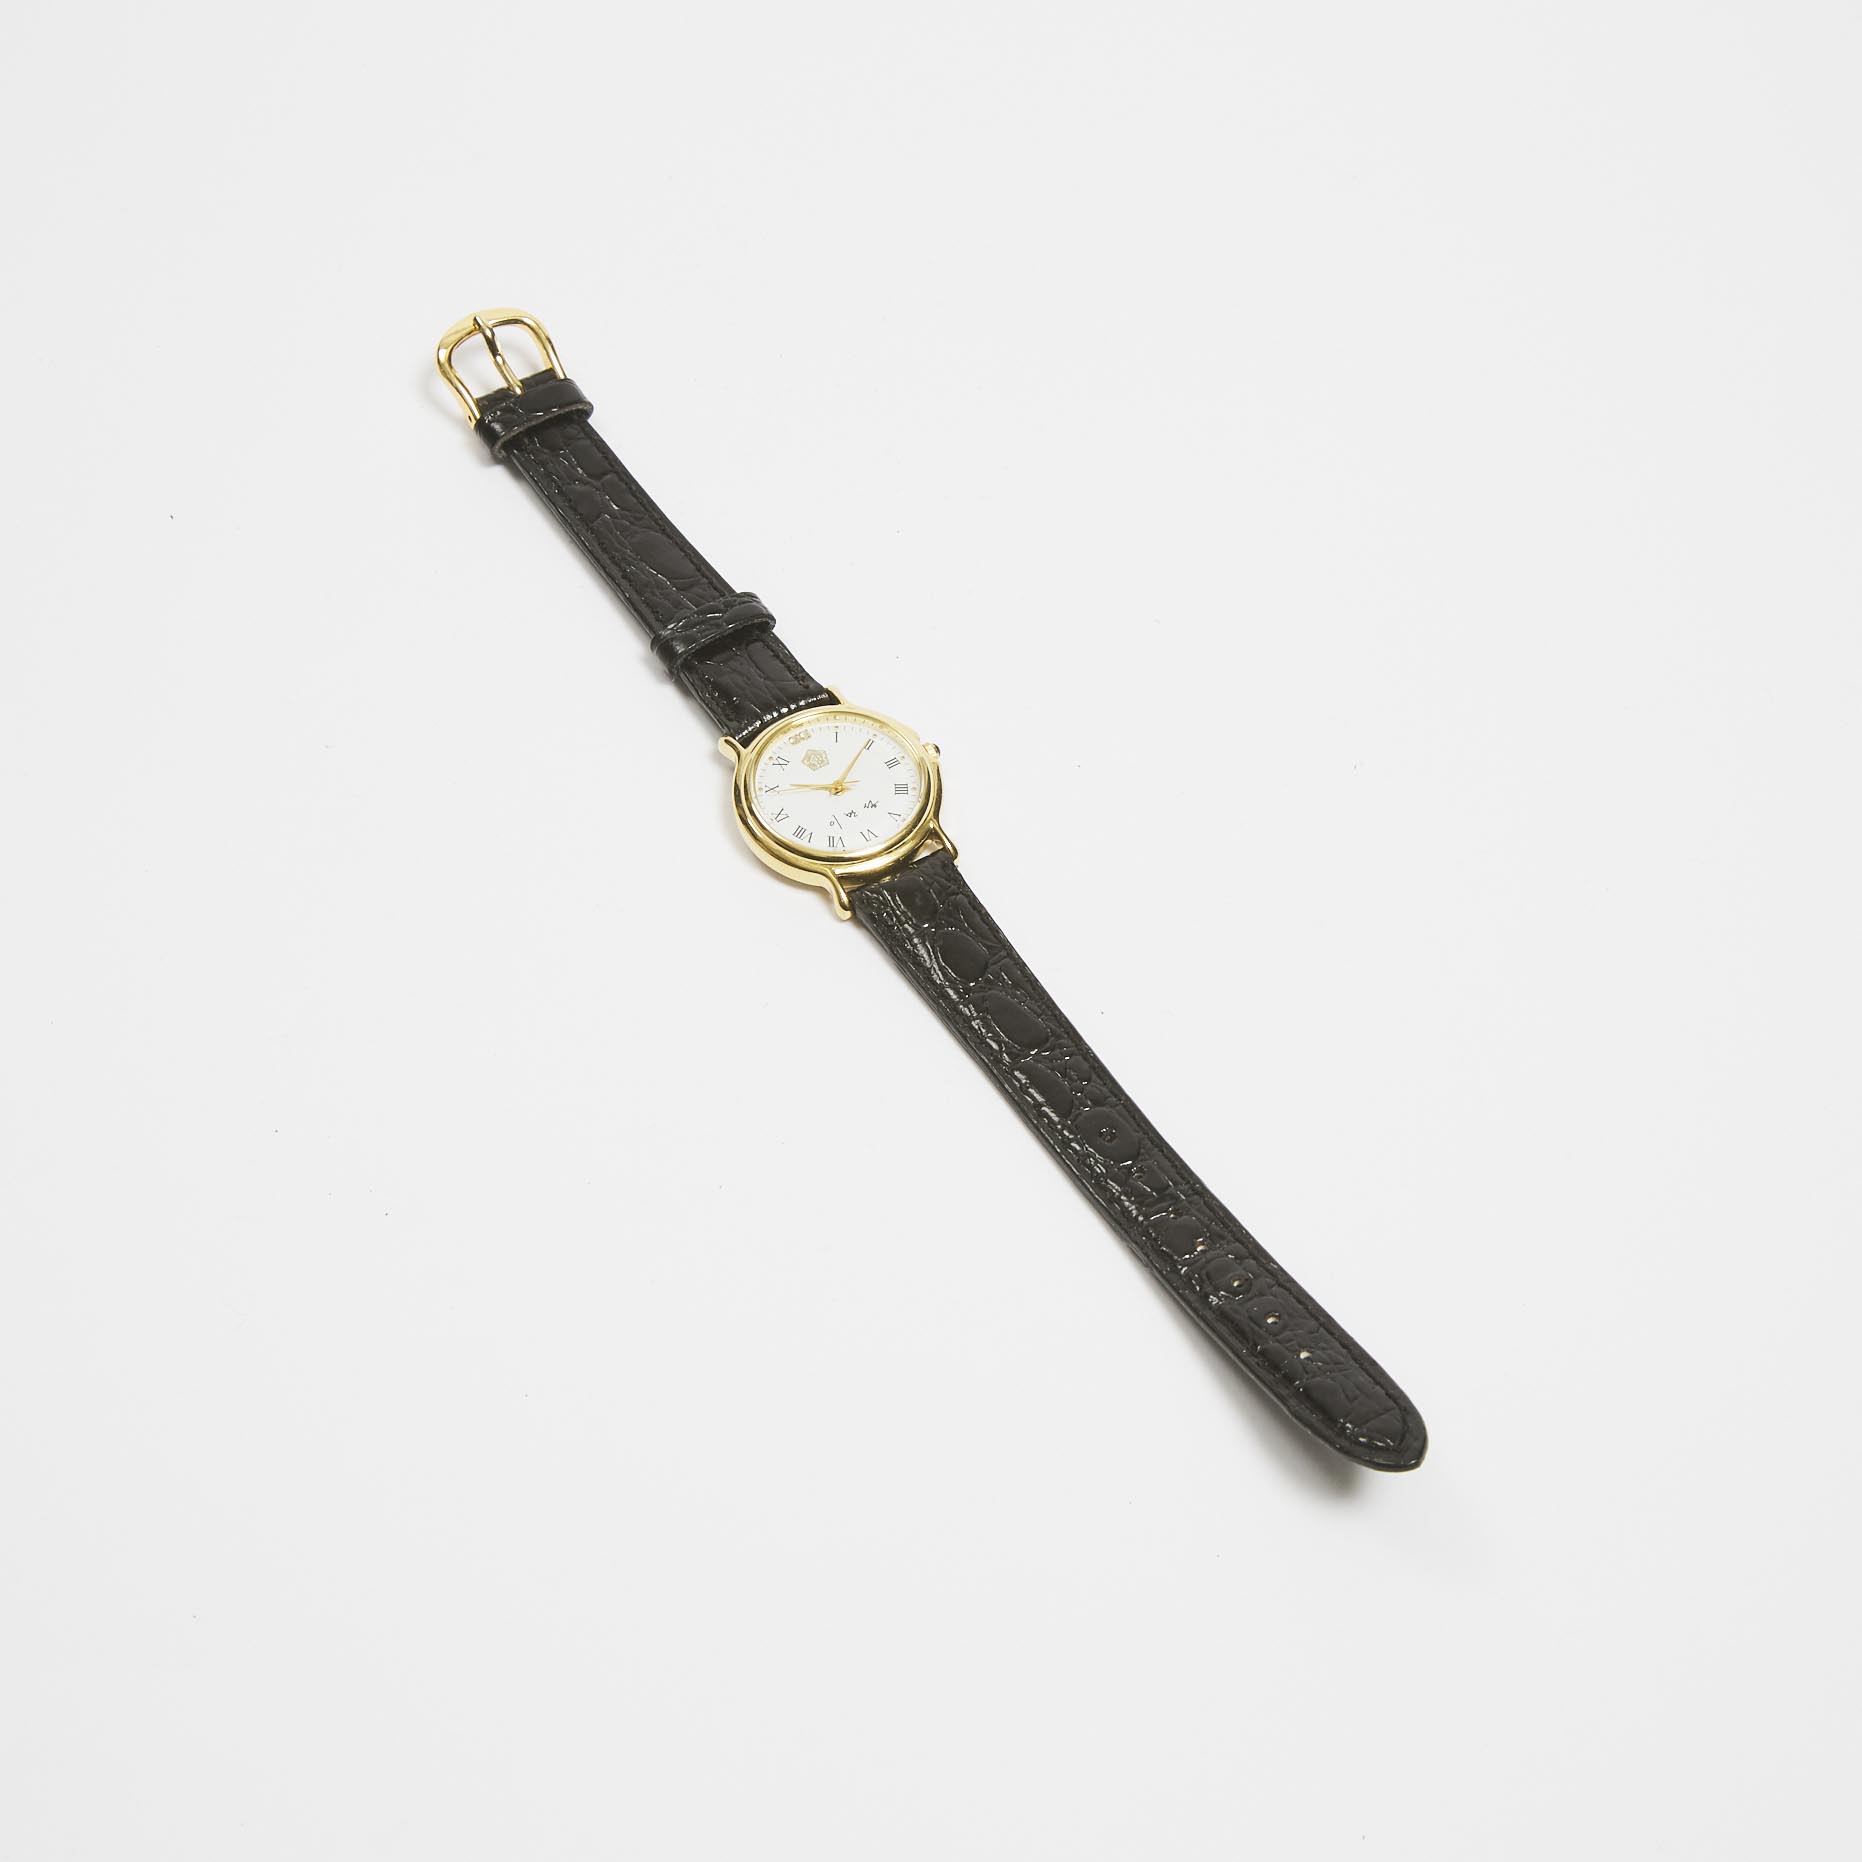 A Korean Wristwatch With the Former 3ac2cb